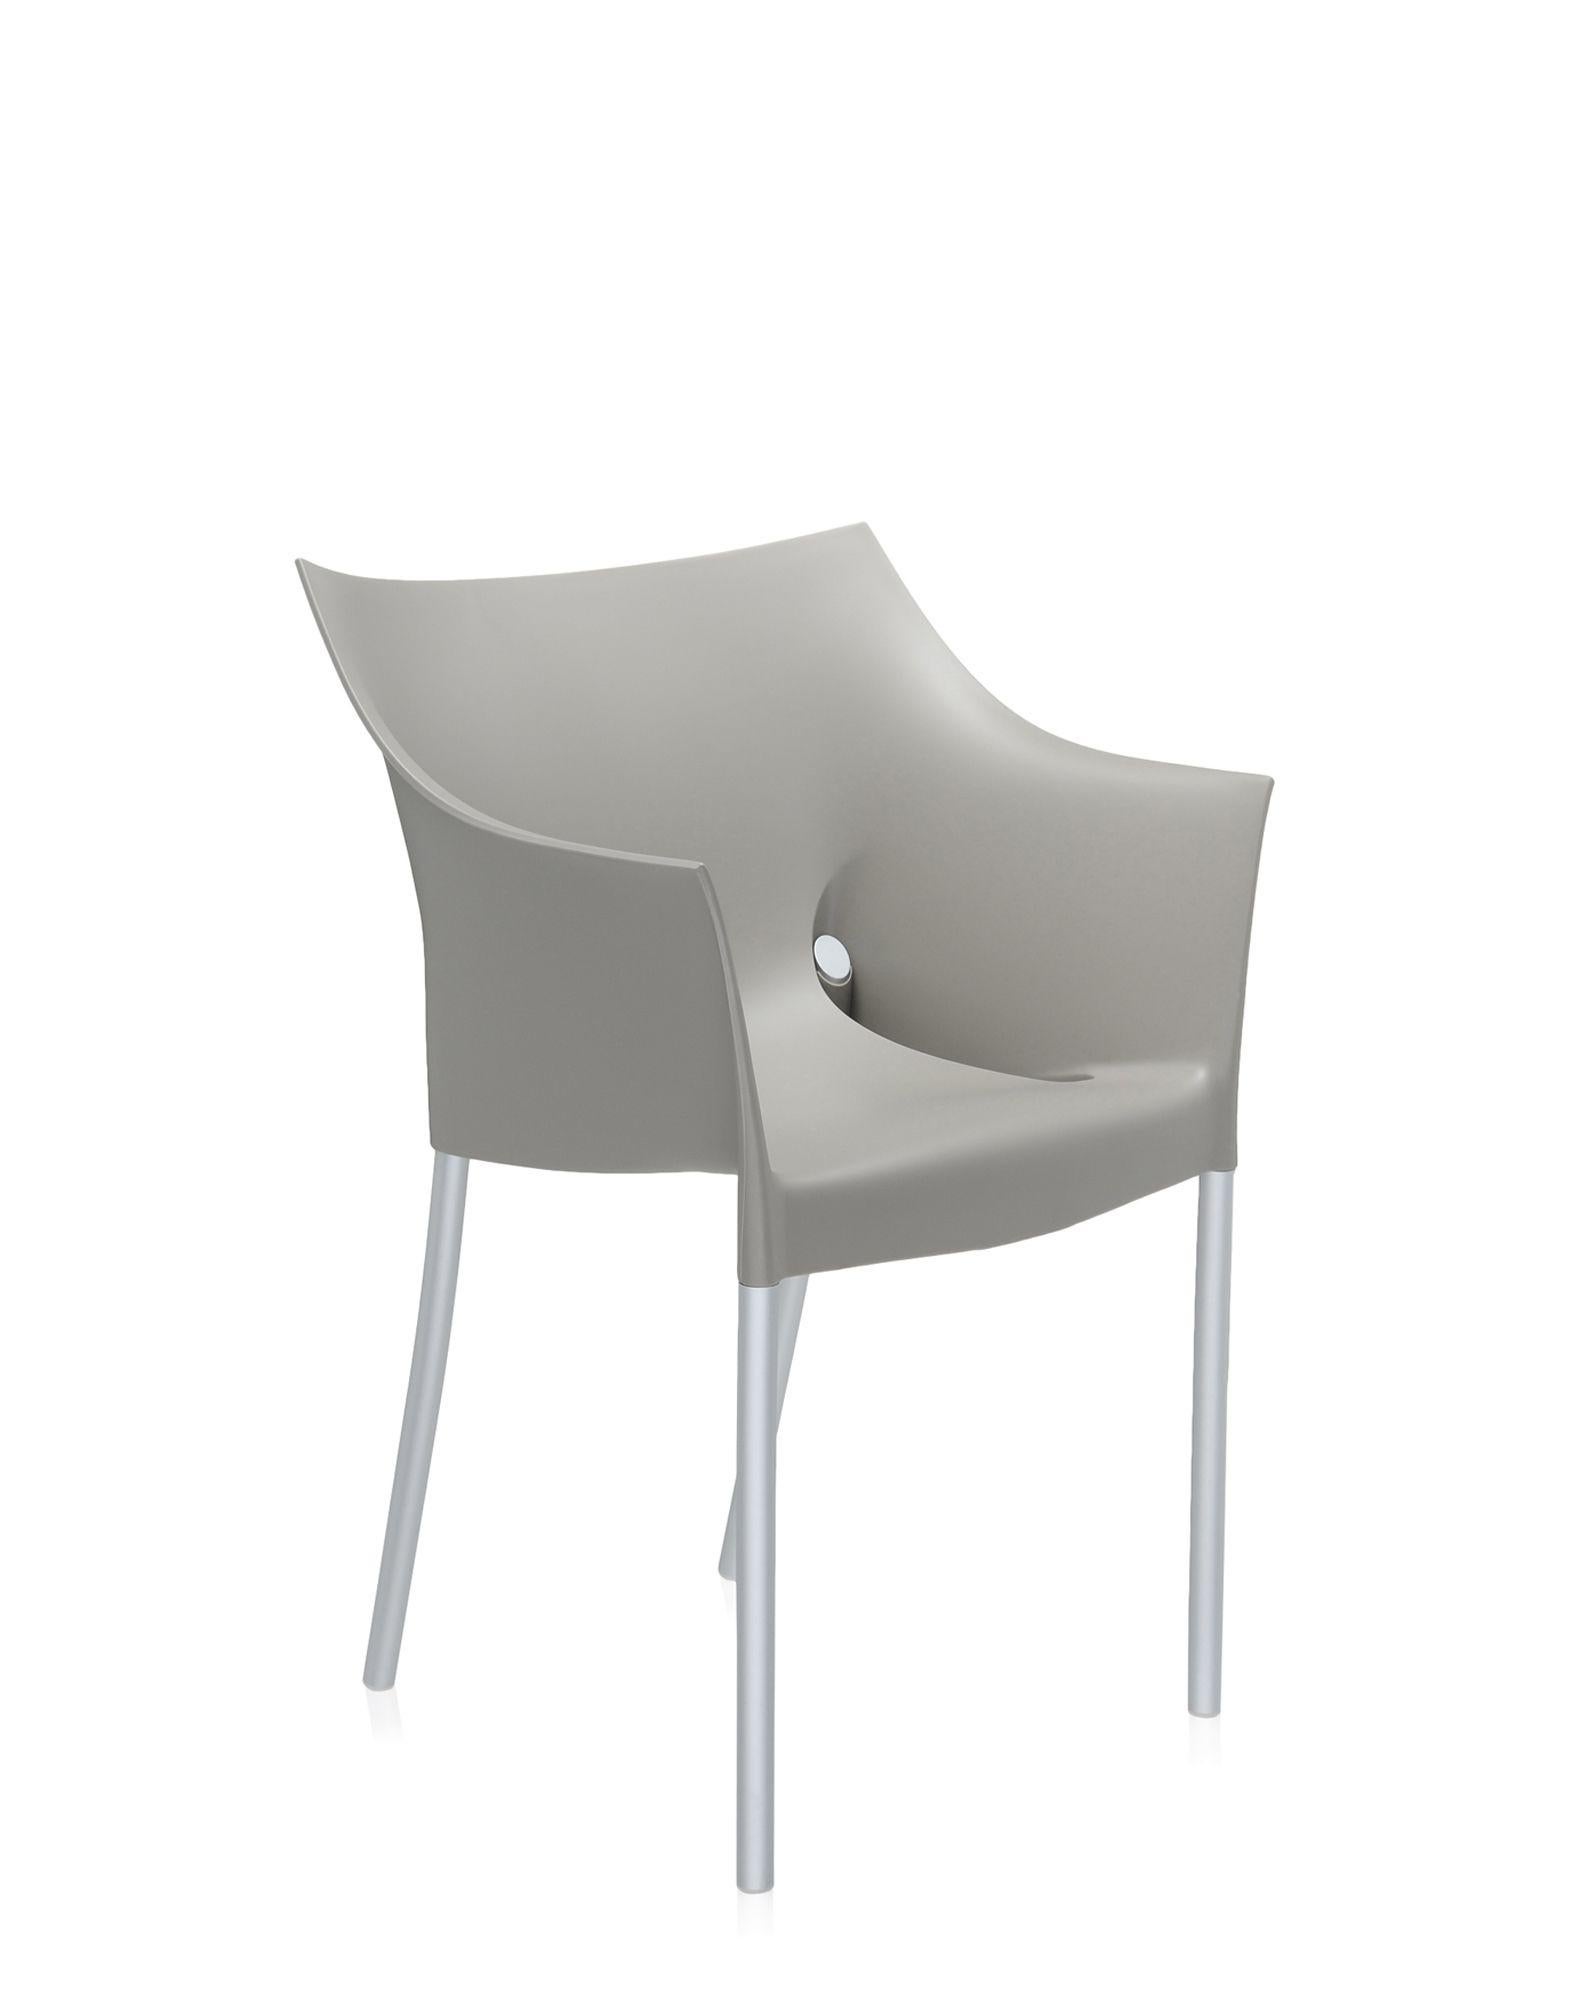 The Dr. NO small armchair is a Kartell classic, known for its perfect combination of functionality and beauty. Dr. NO is not affected by temperature changes, is stackable up to four elements and characterised by its enveloping comfortable seat,